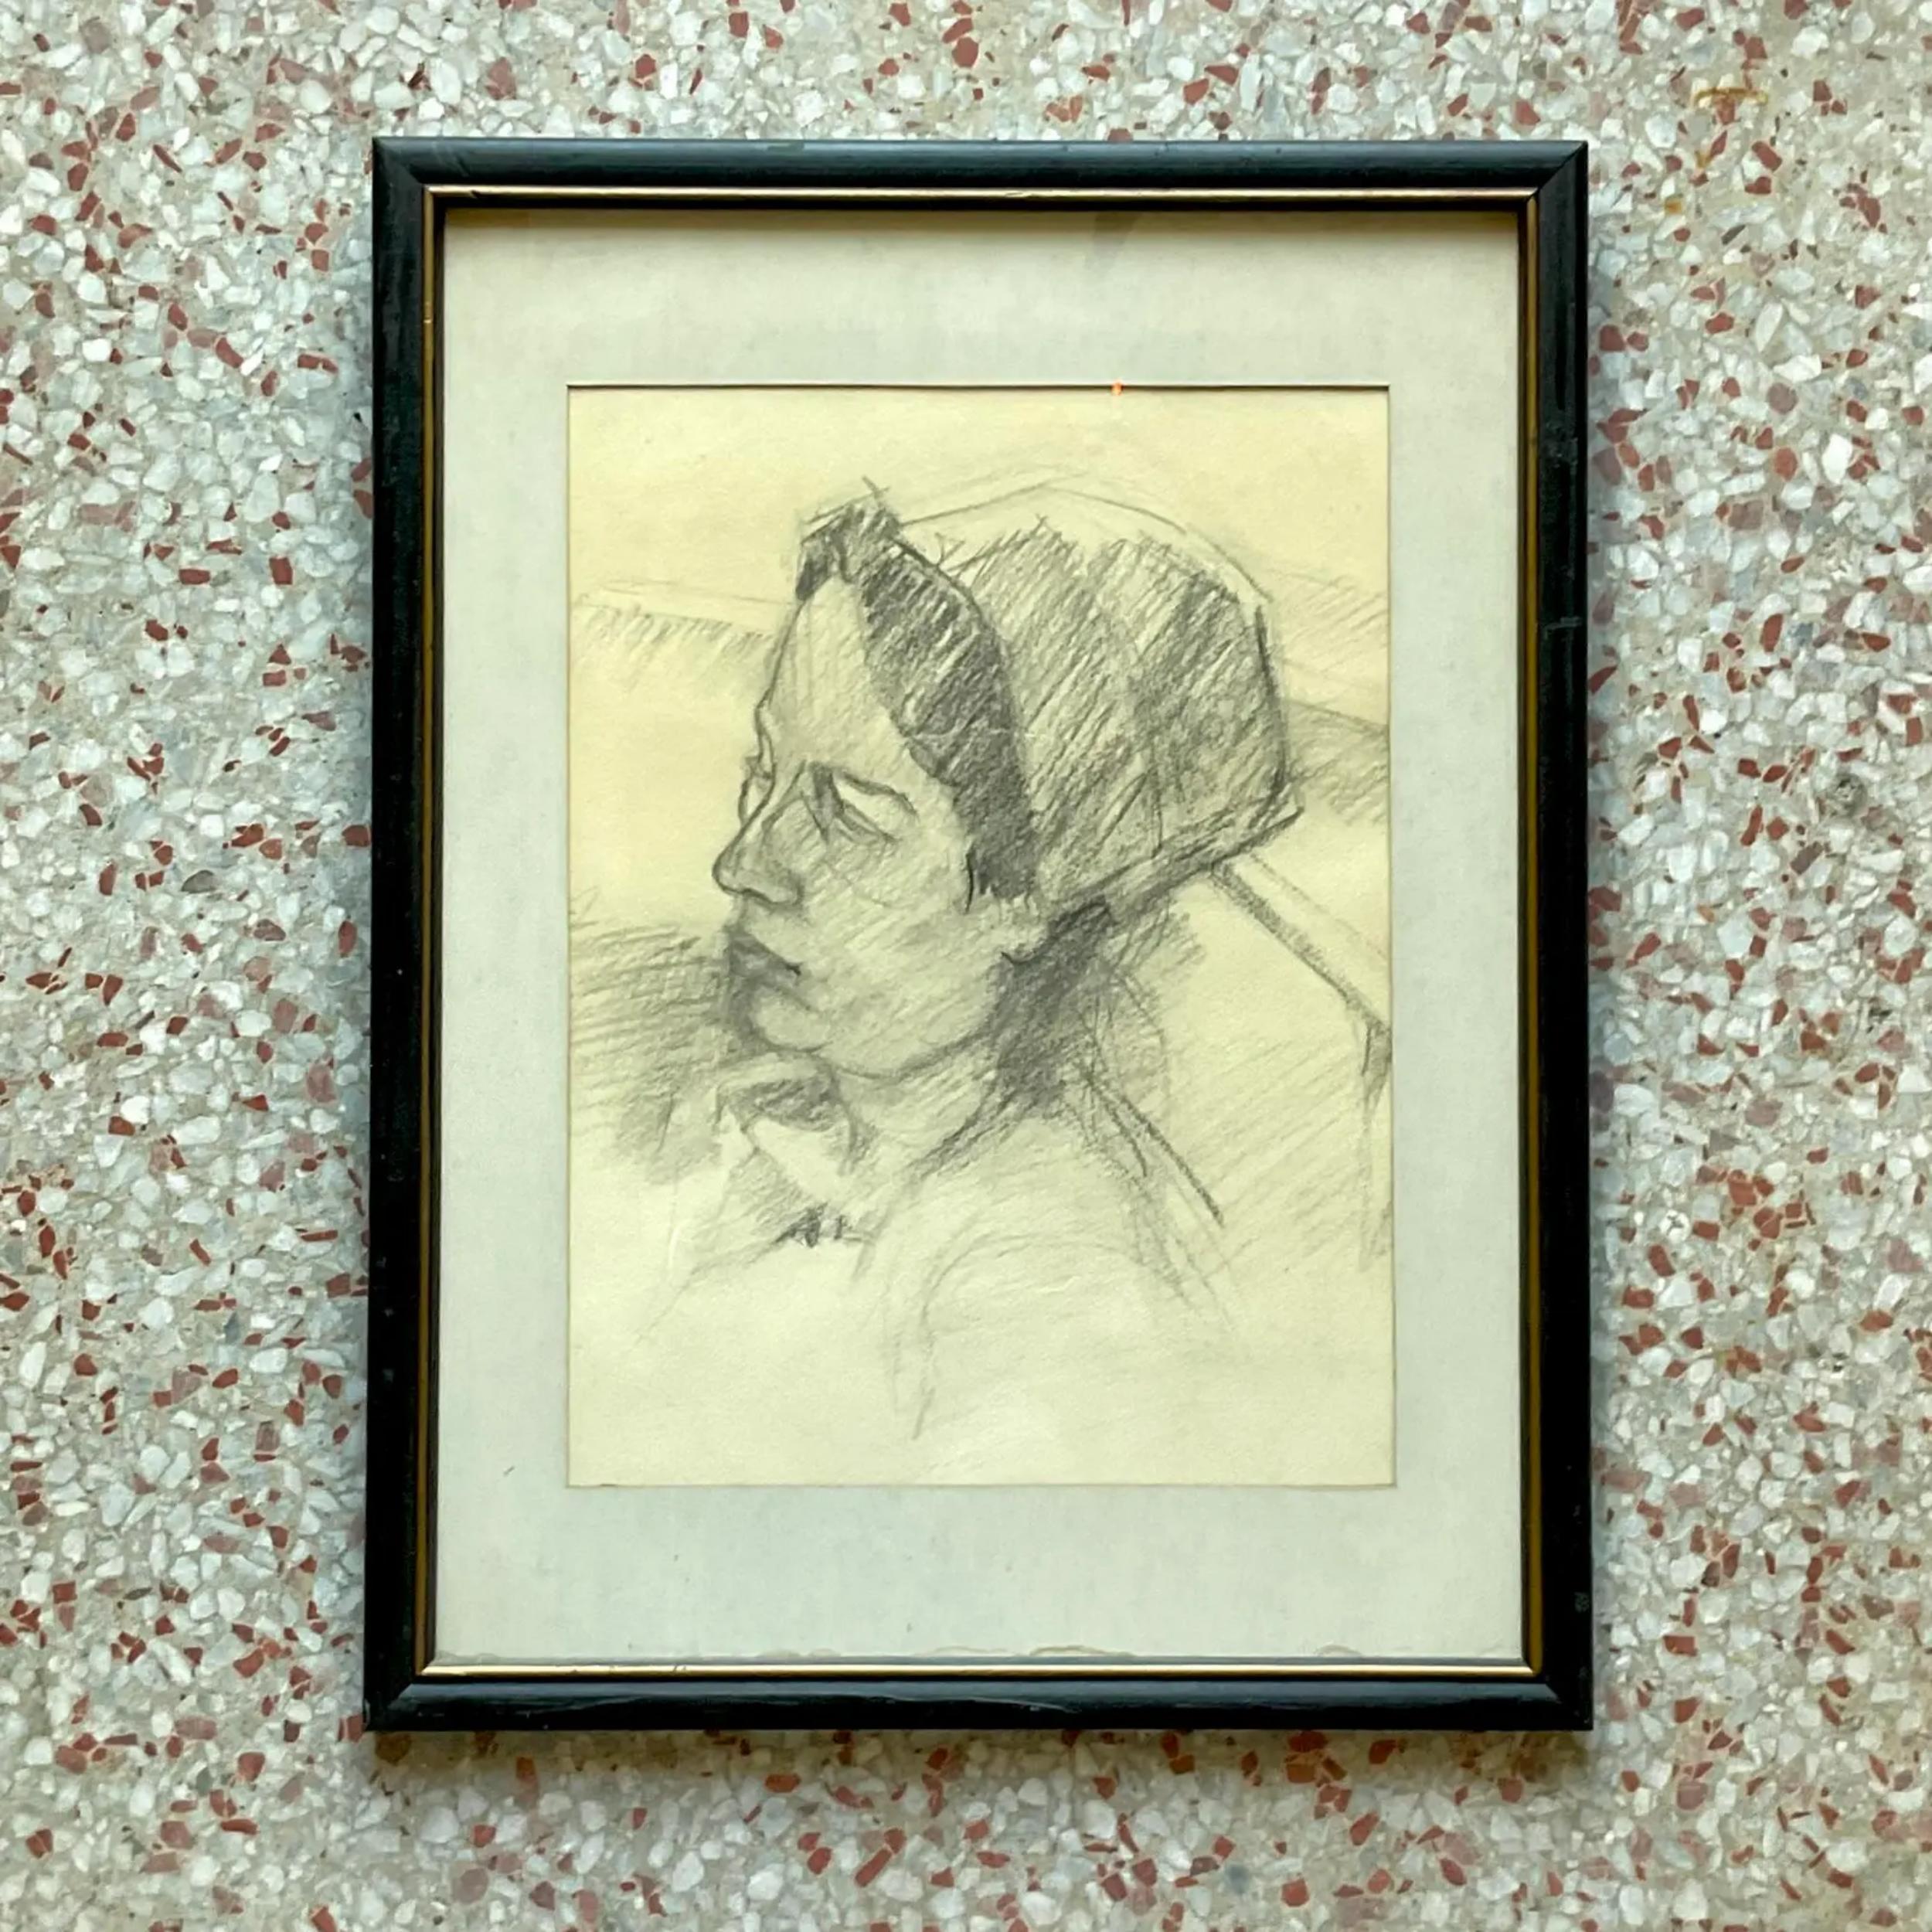 A Vintage Boho pencil sketch of a woman. A chic pencil on paper composition. Quiet and charming. Unsigned. Acquired from a NY estate